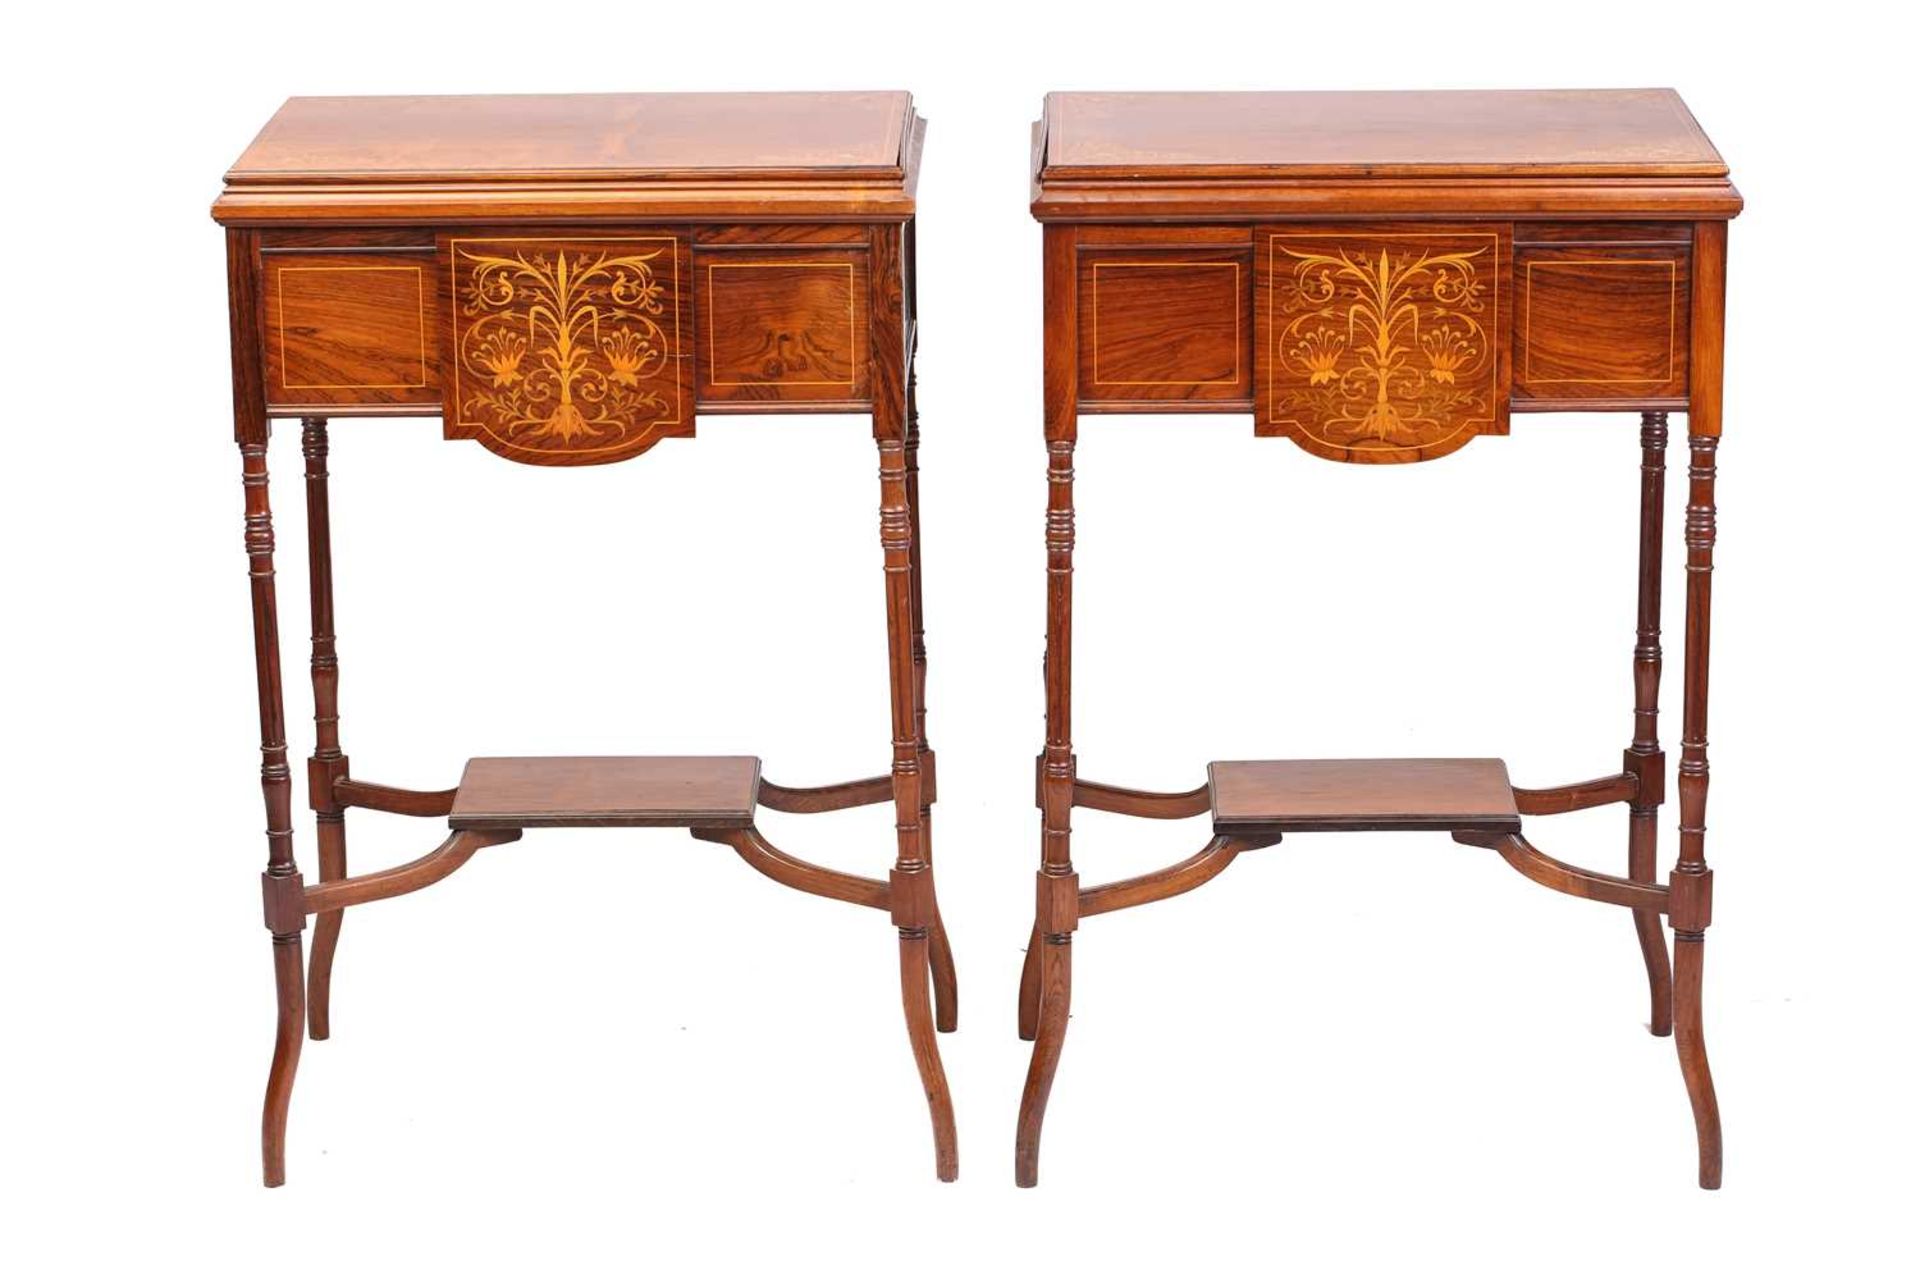 A pair of Edwardian rectangular figured rosewood jardiniere/ wine cooler tables, possibly by Edwards - Image 14 of 16